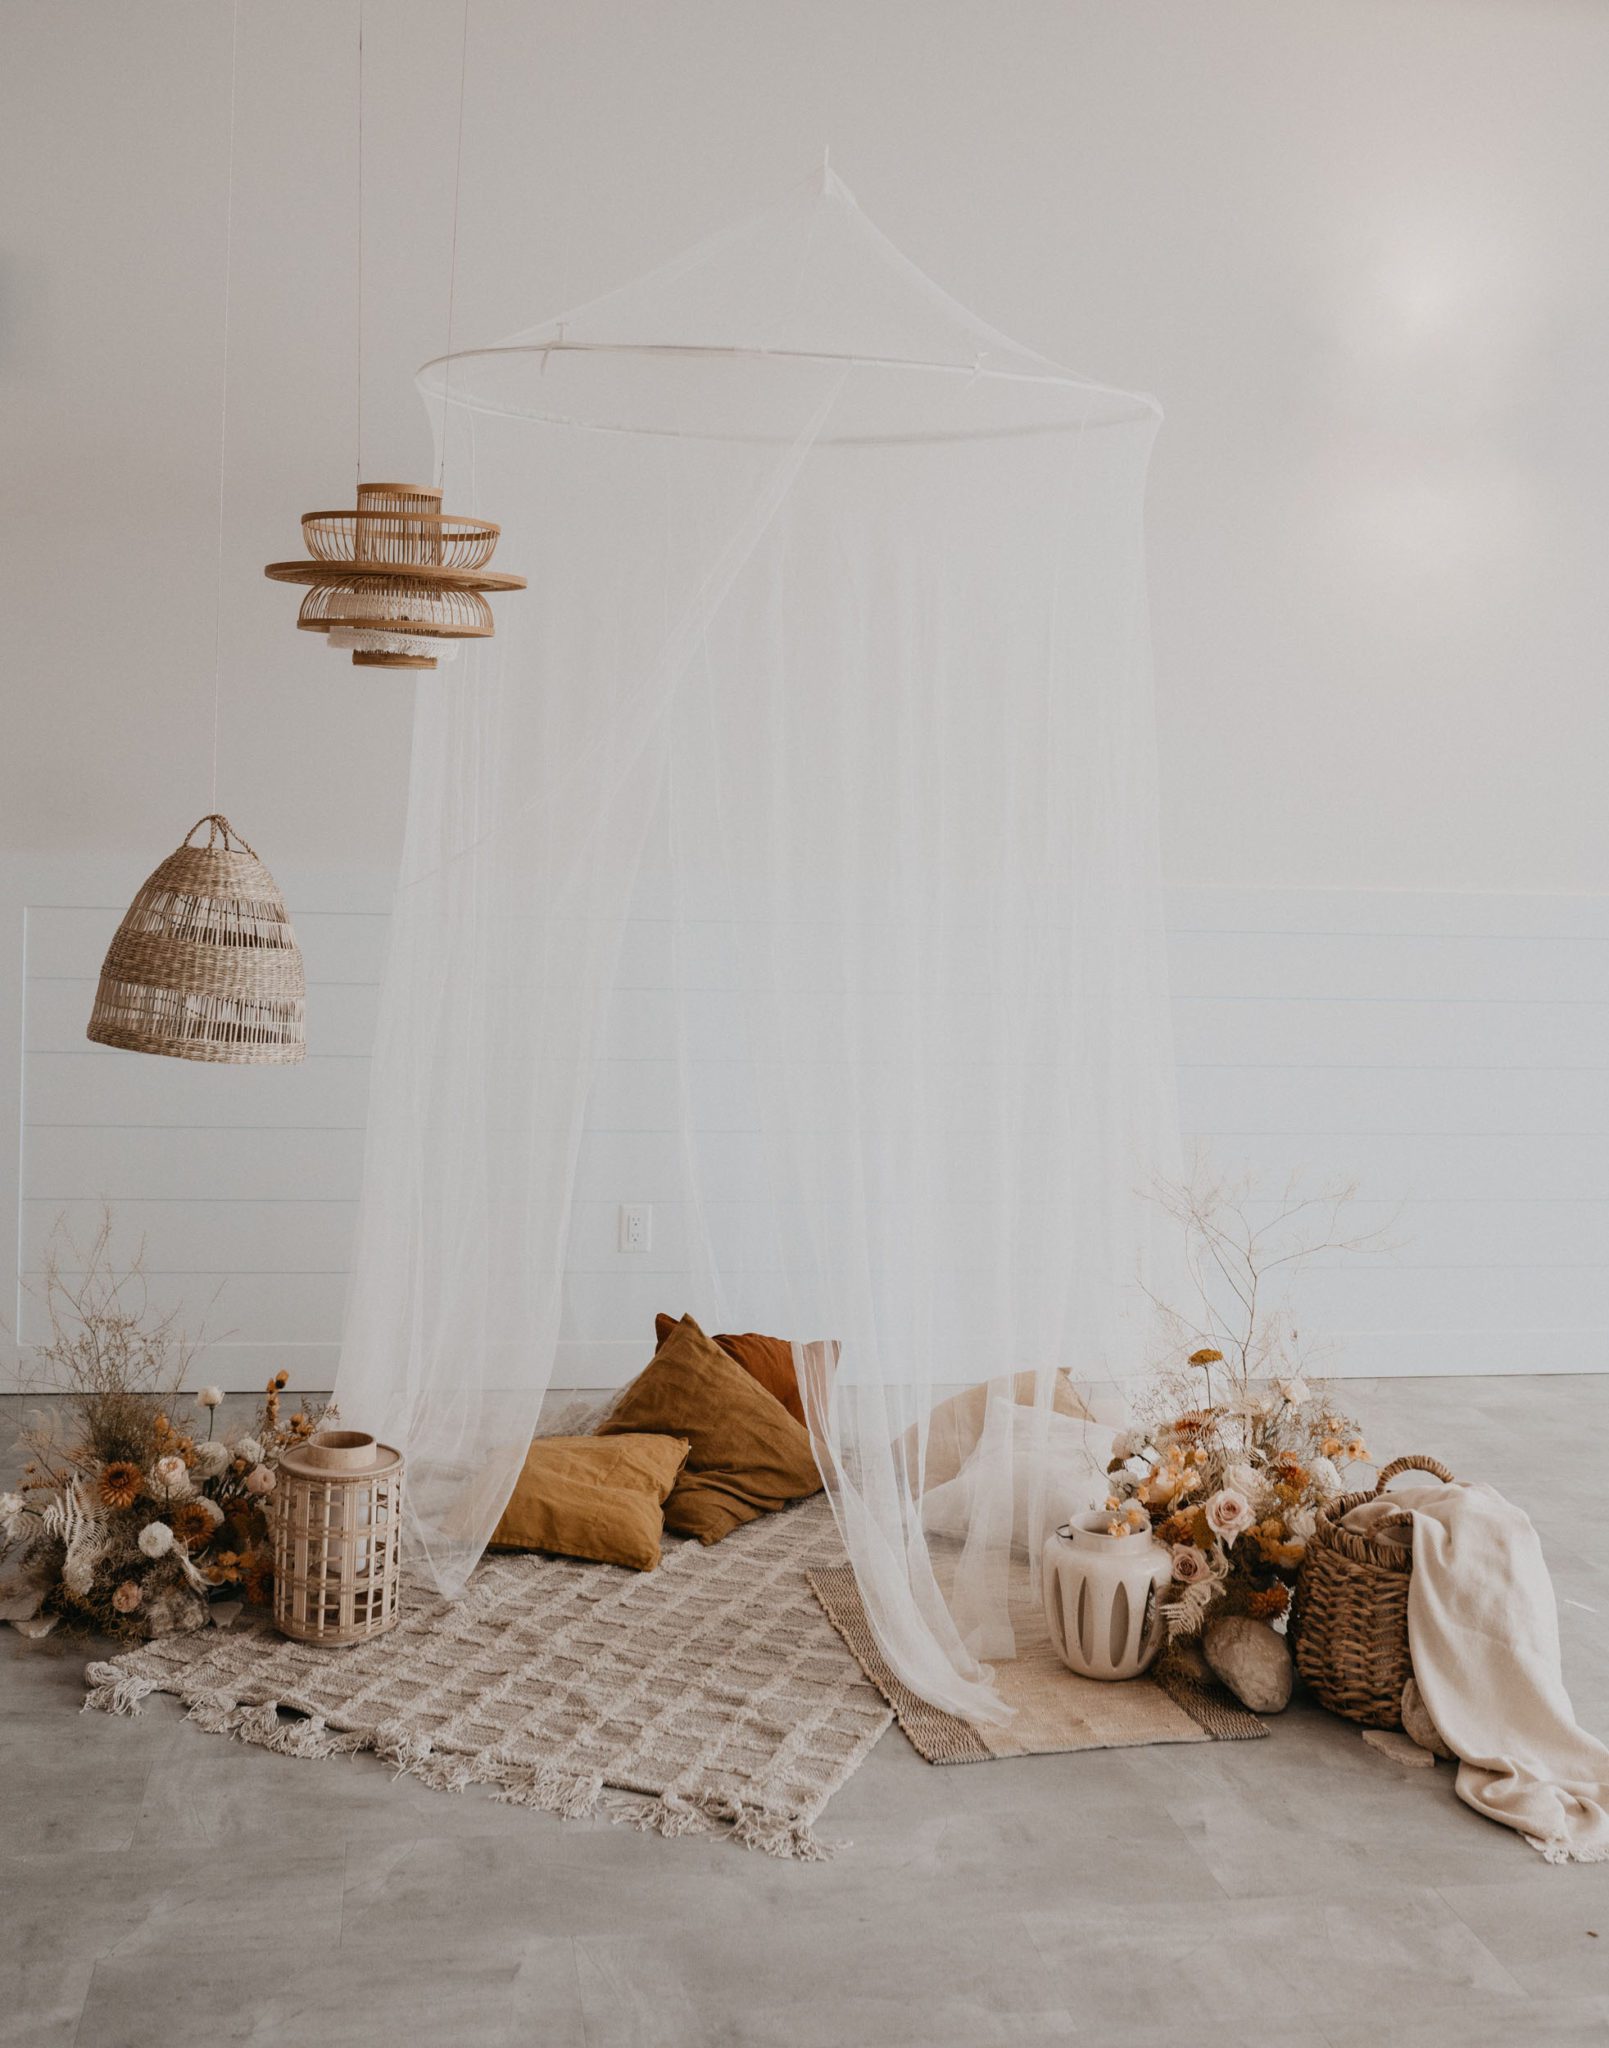 This Indoor Elopement Inspiration Brings The Outdoors Inside With A Boho Canopy Tent for Two